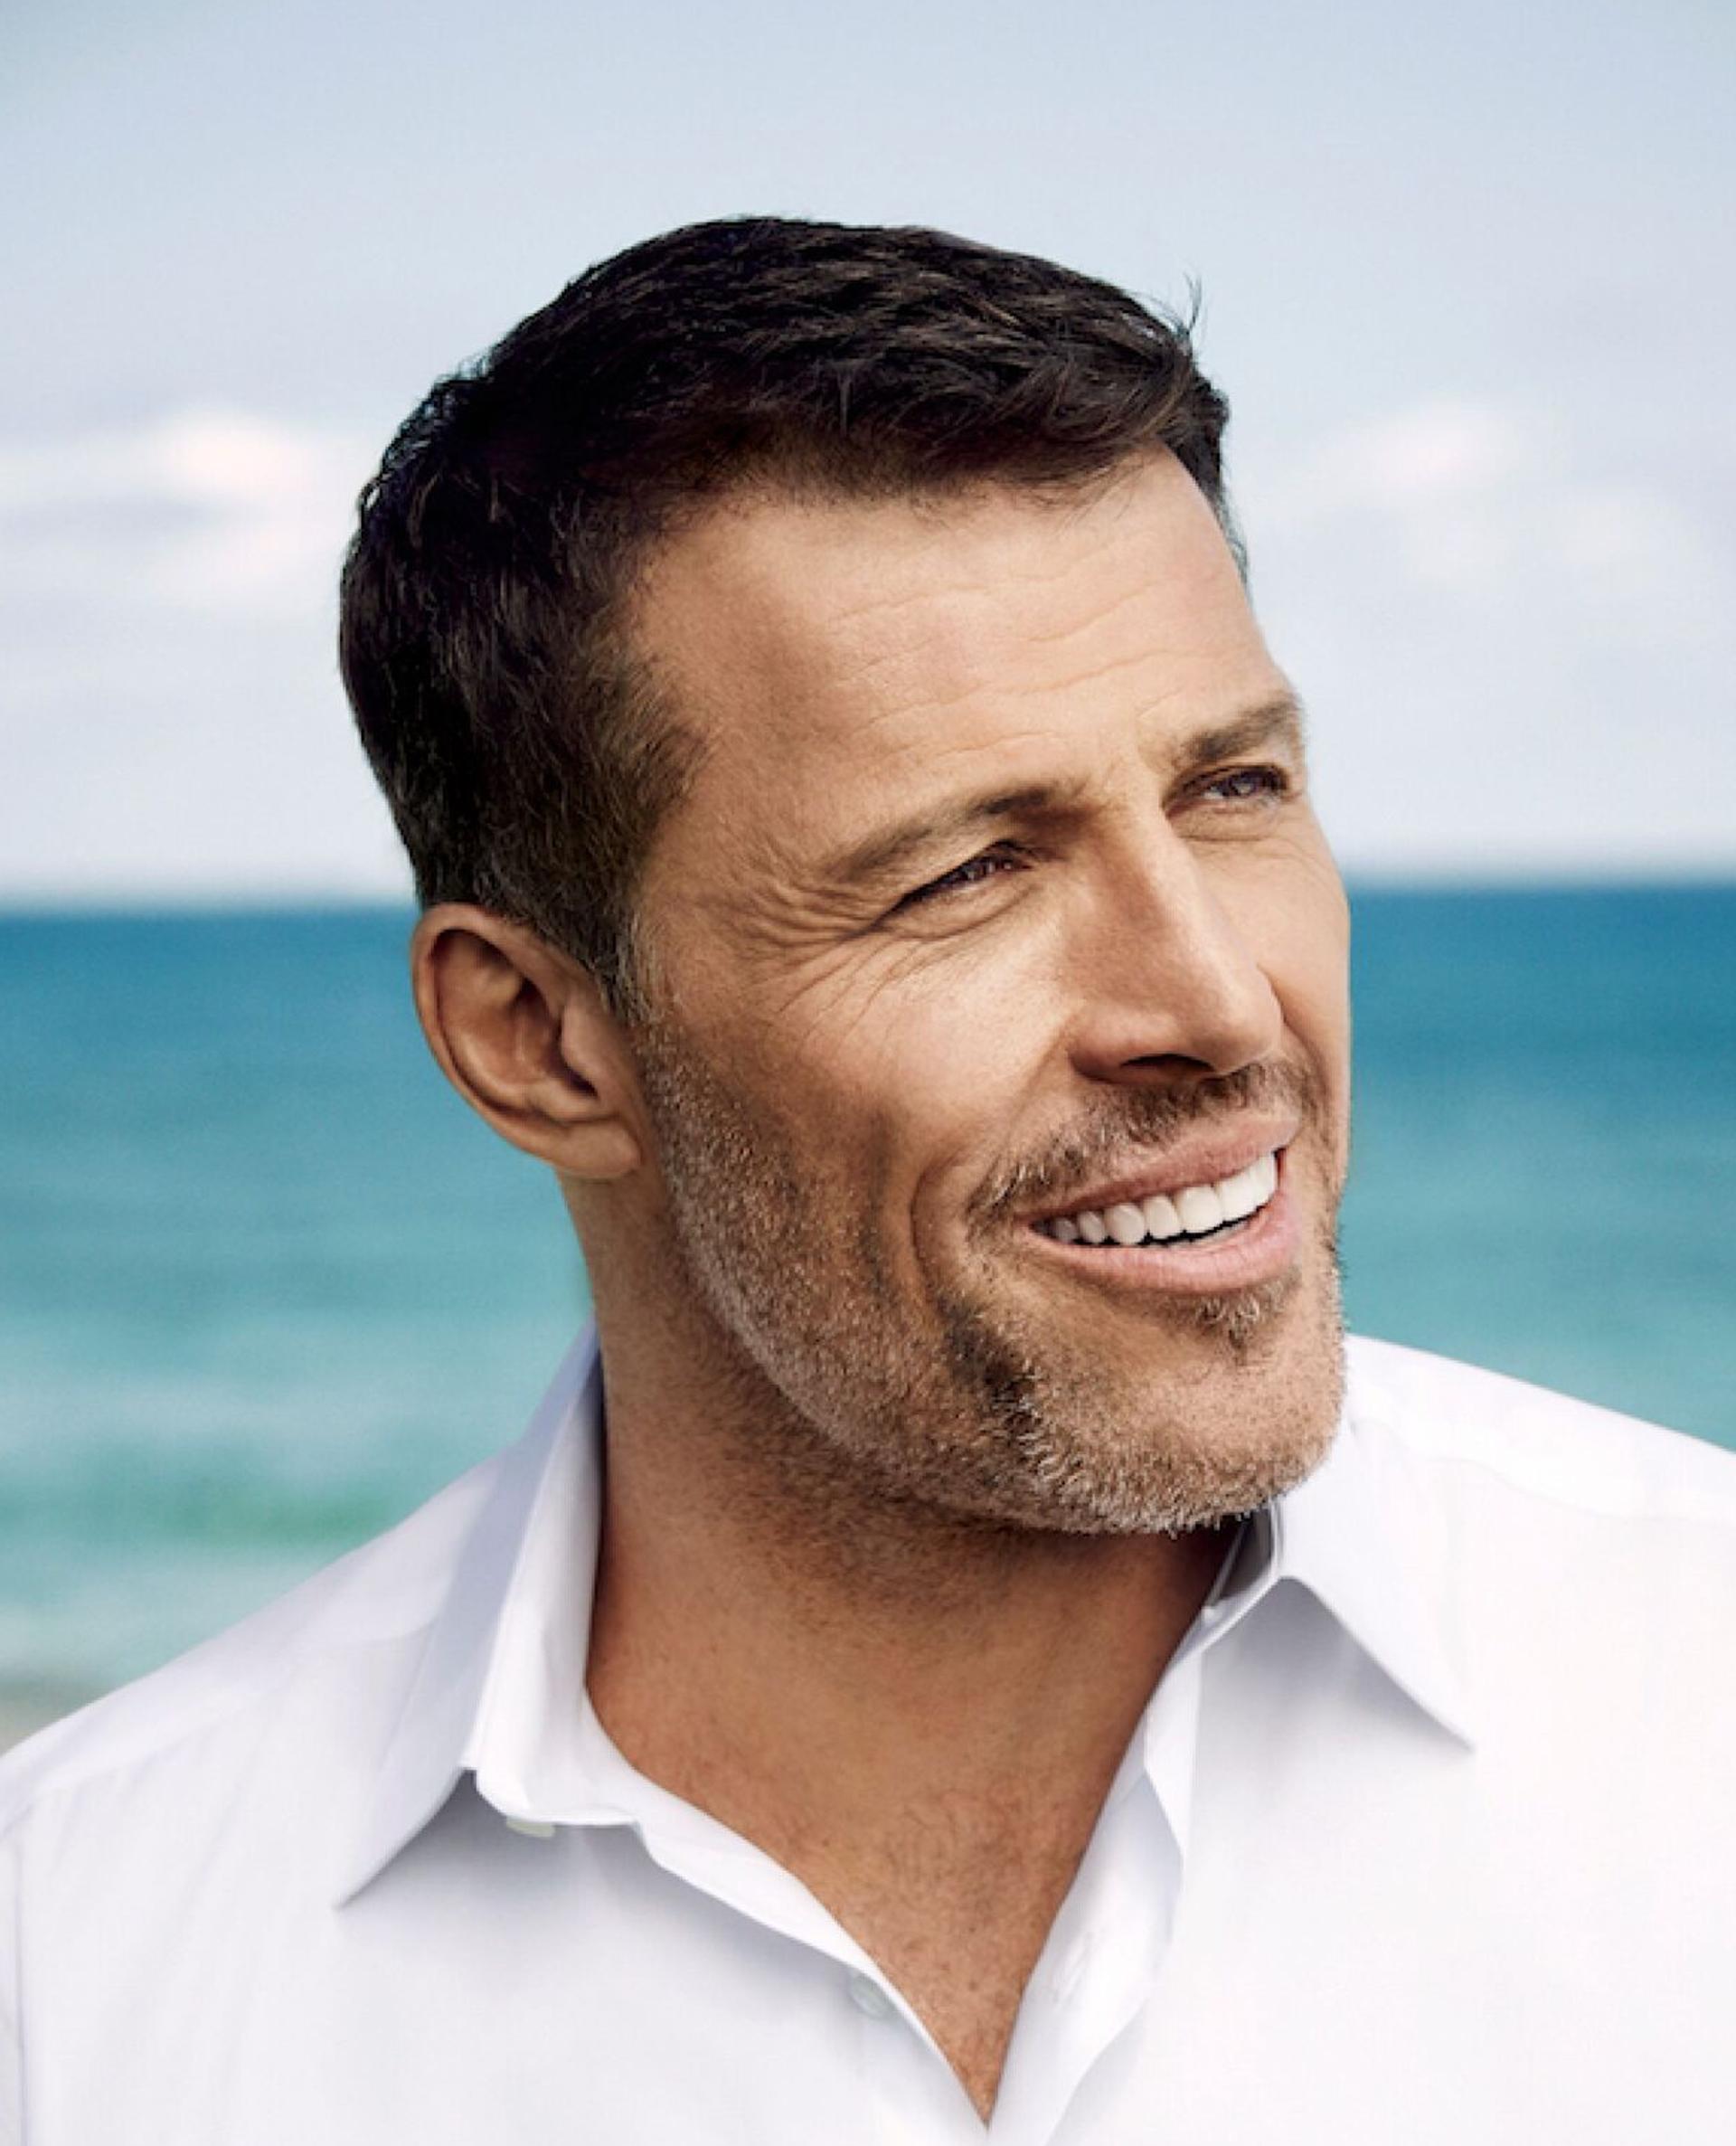 Tony Robbins Portrait Photo head turned smiling in front of sea